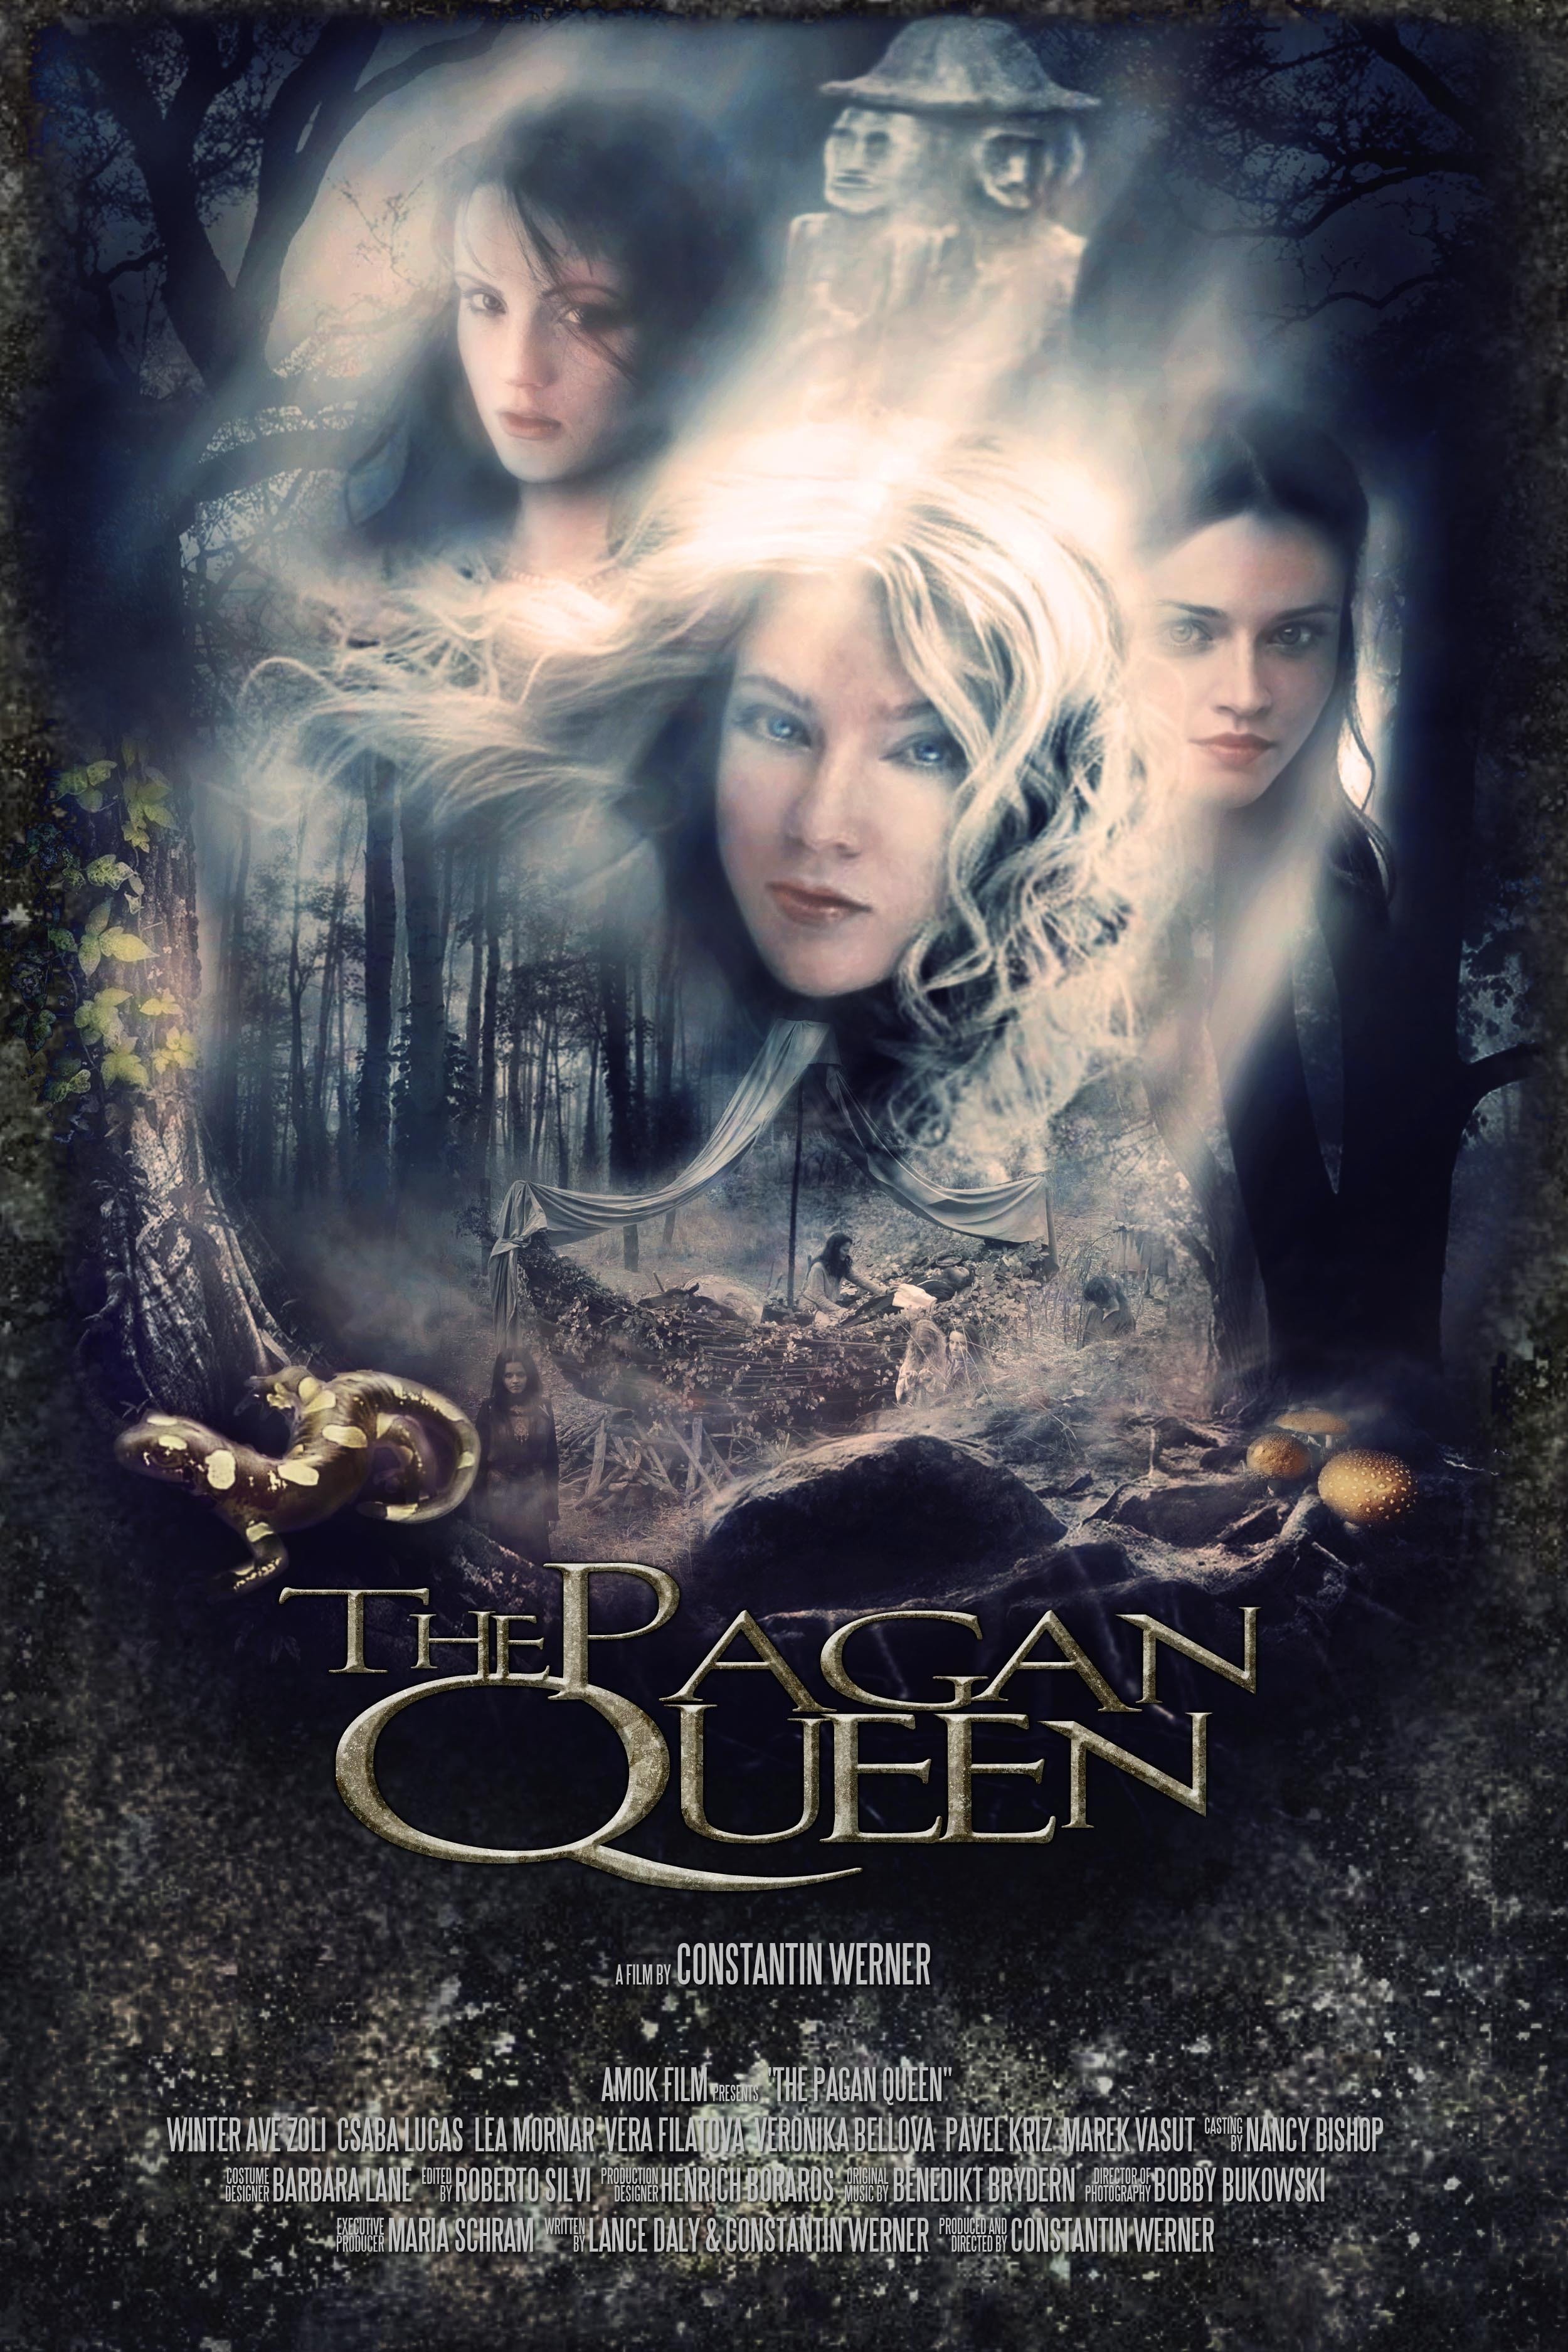 The Pagan Queen (2009) starring Winter Ave Zoli on DVD on DVD